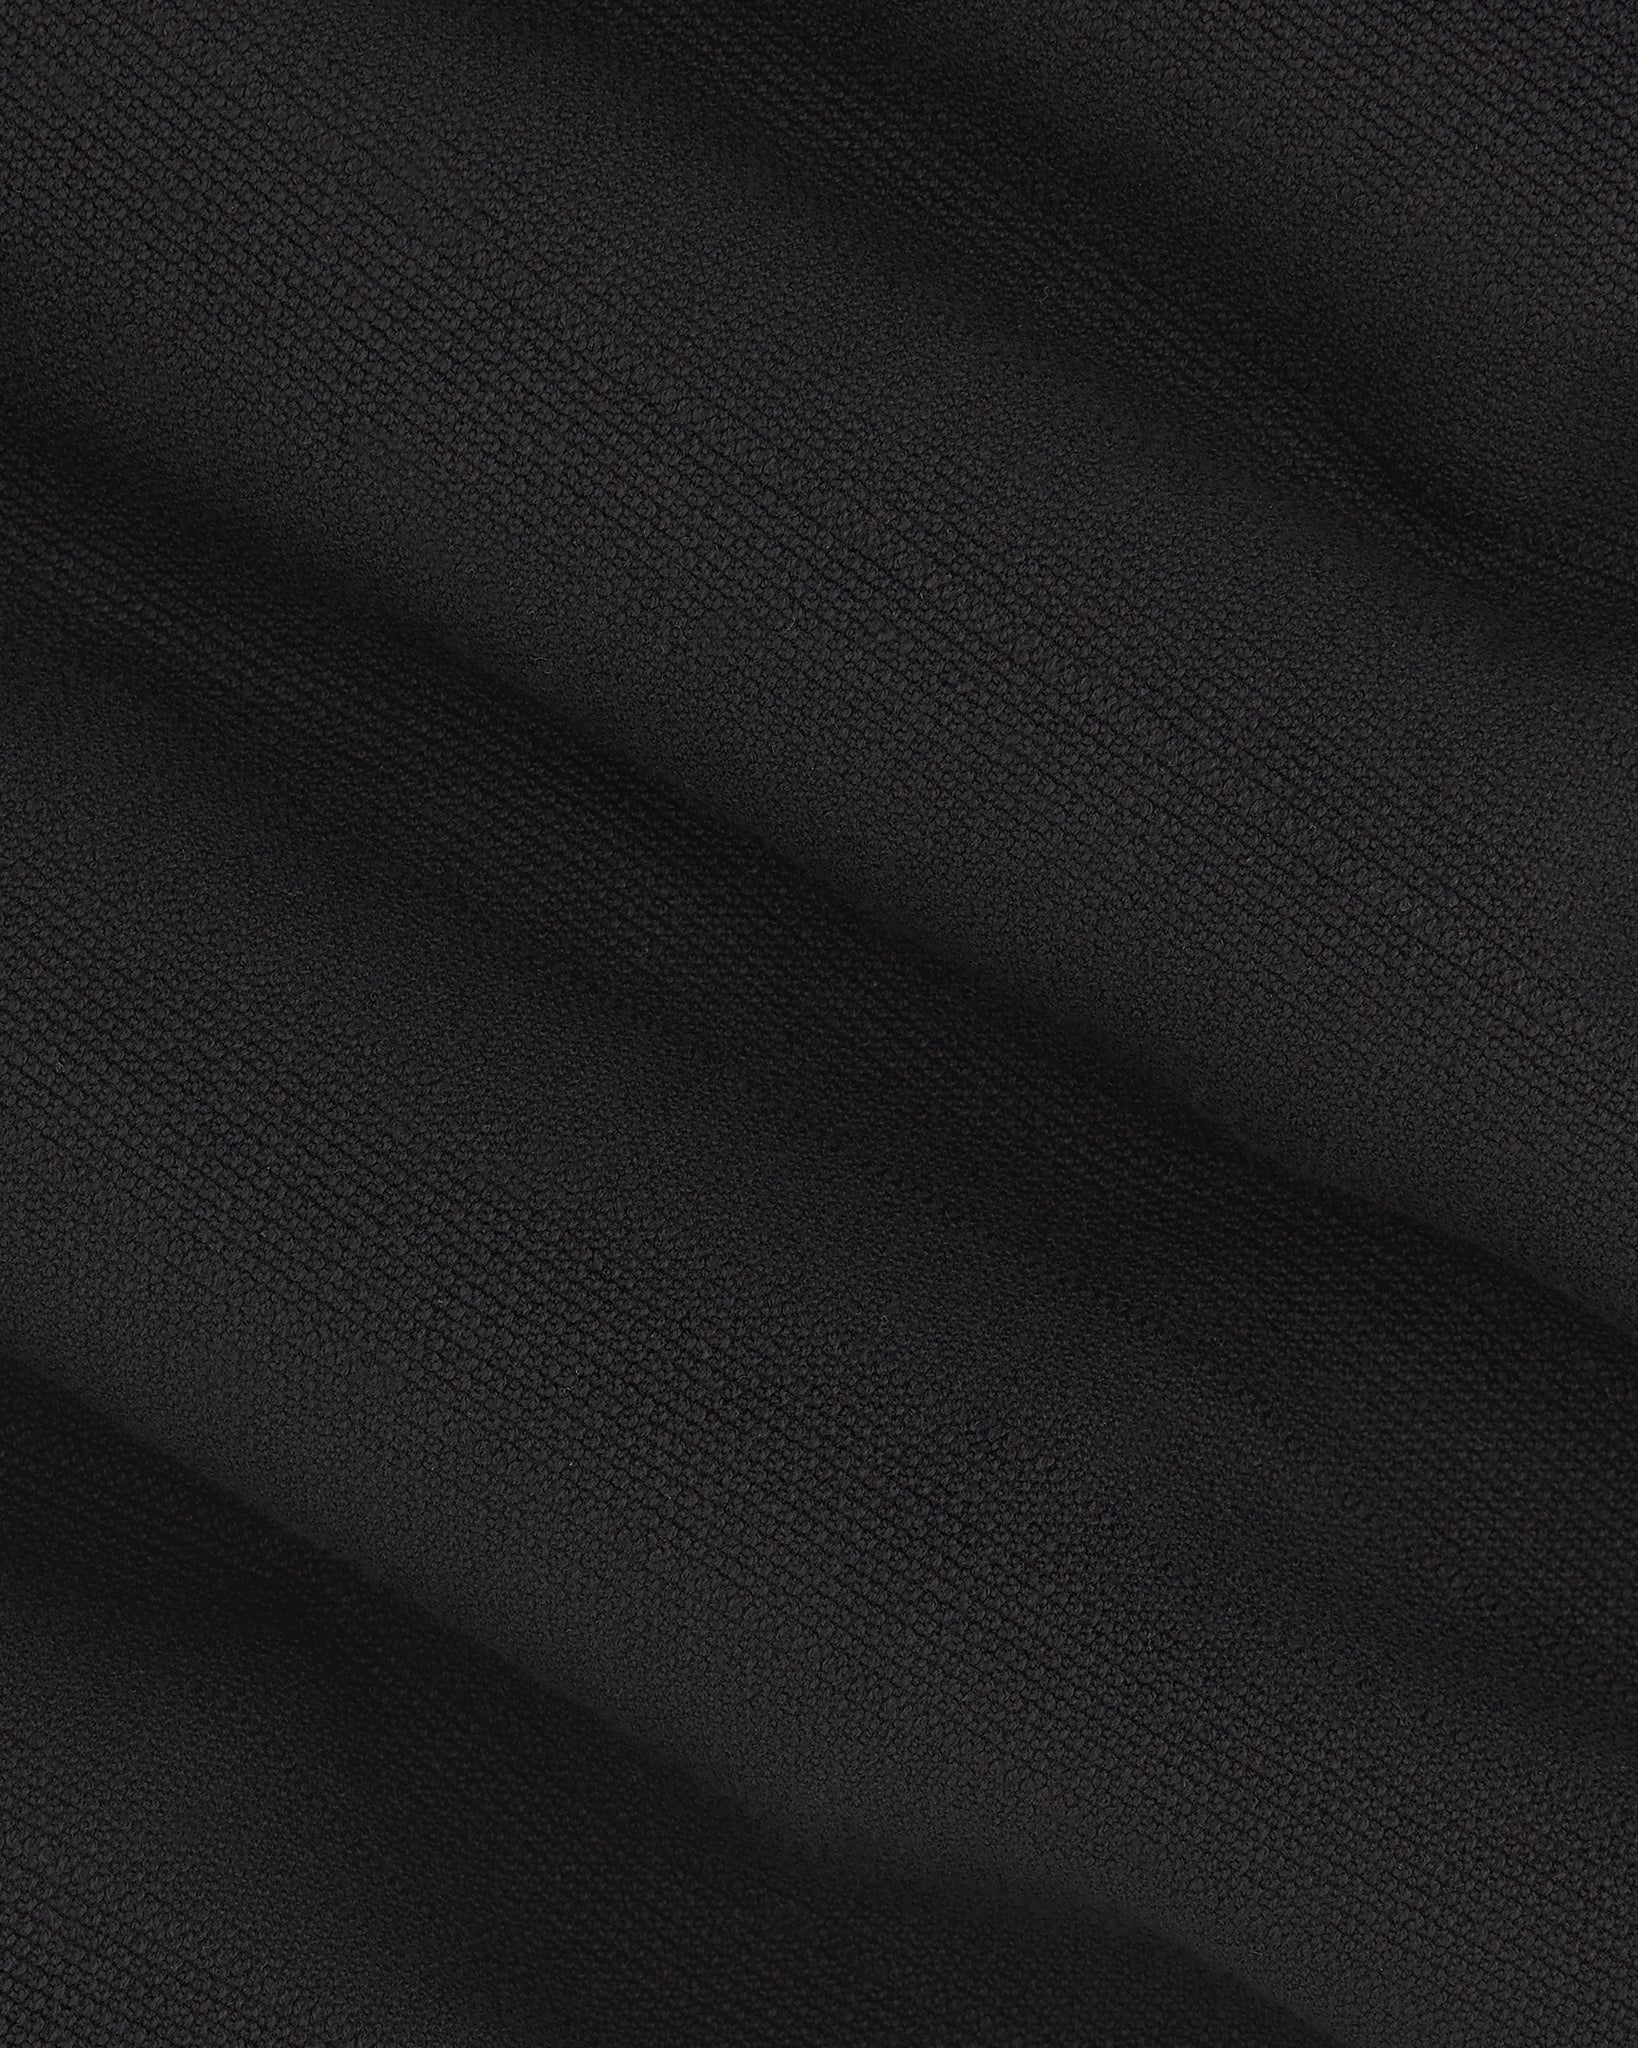 Southern Gents Knit Polo - Tipped Black